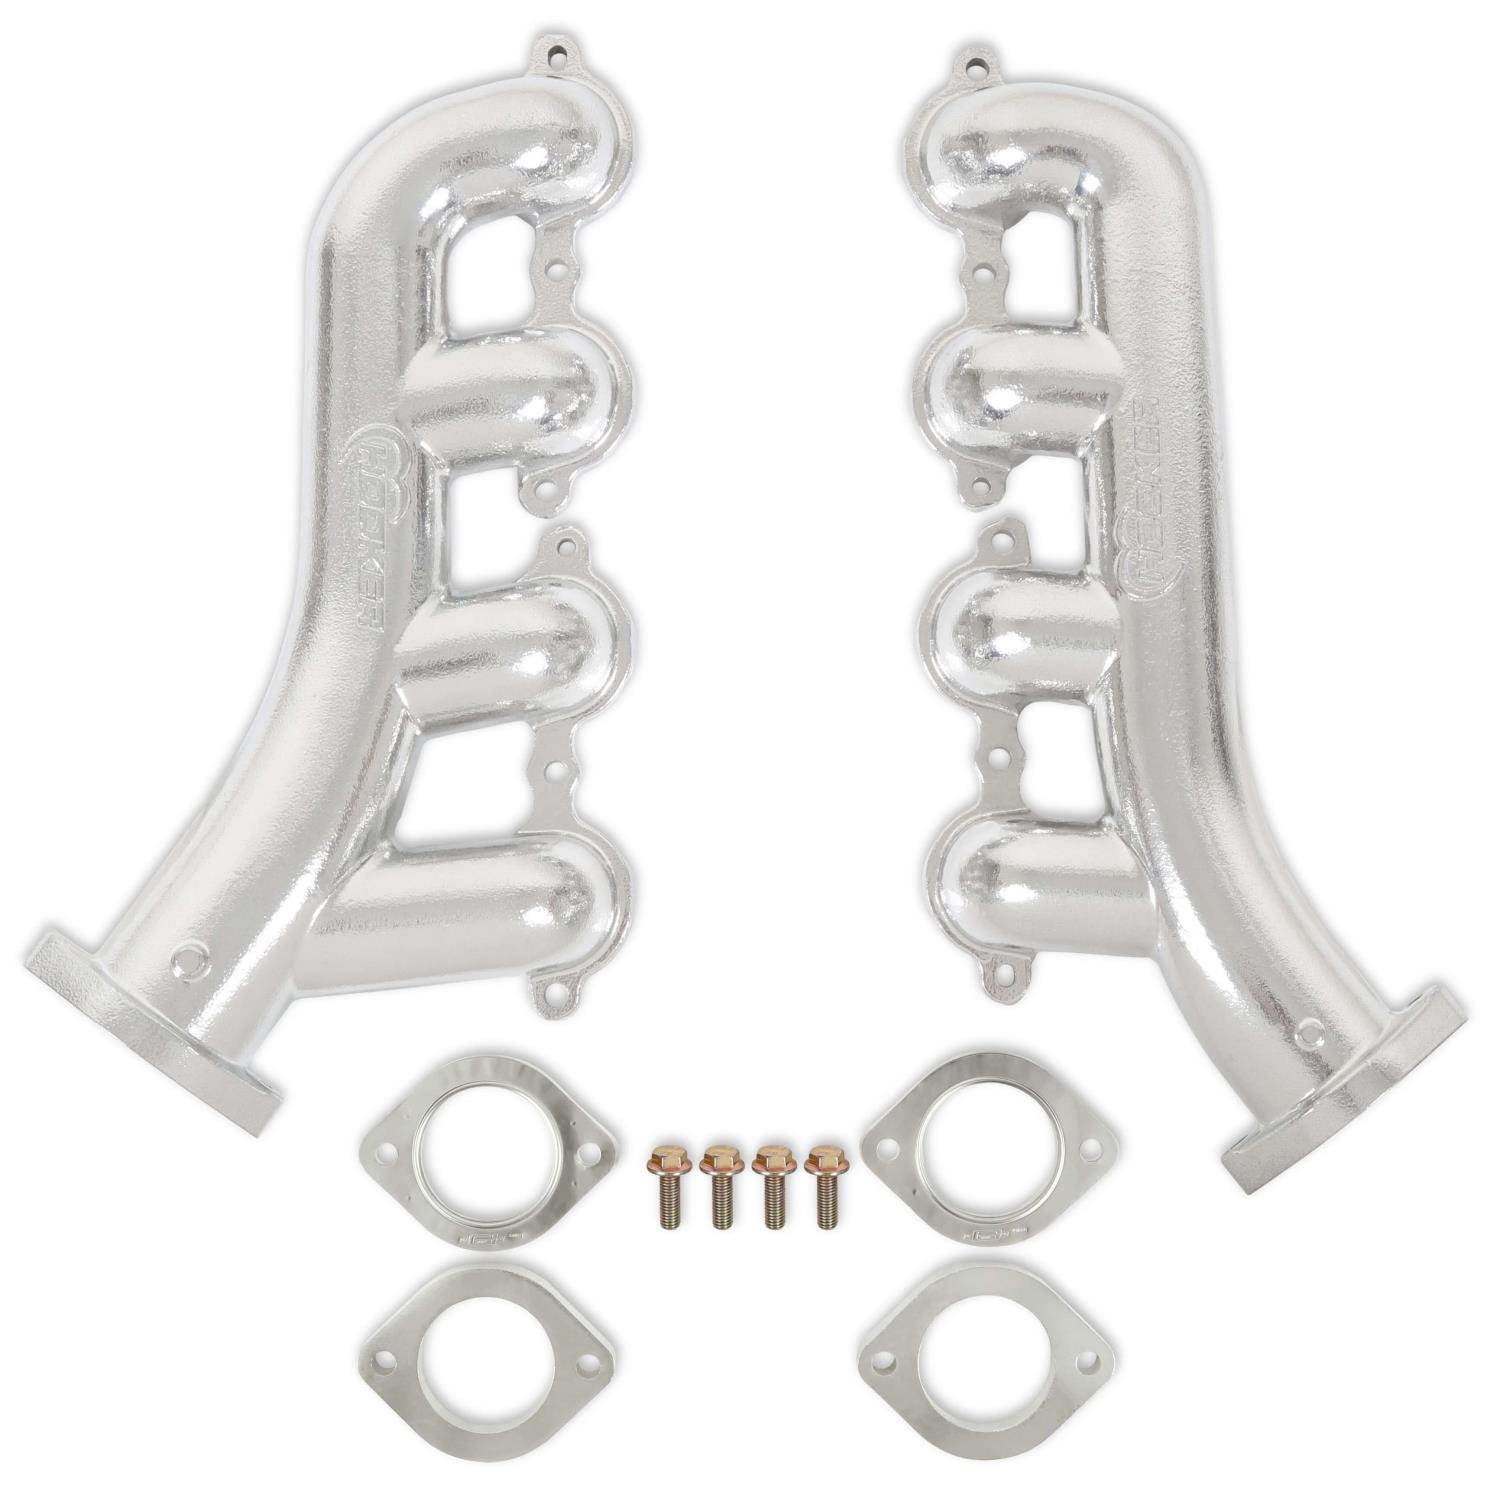 Blackheart LS Engine Swap Exhaust Manifolds for 1982-2004 Chevy S-10, GMC Sonoma [Silver]